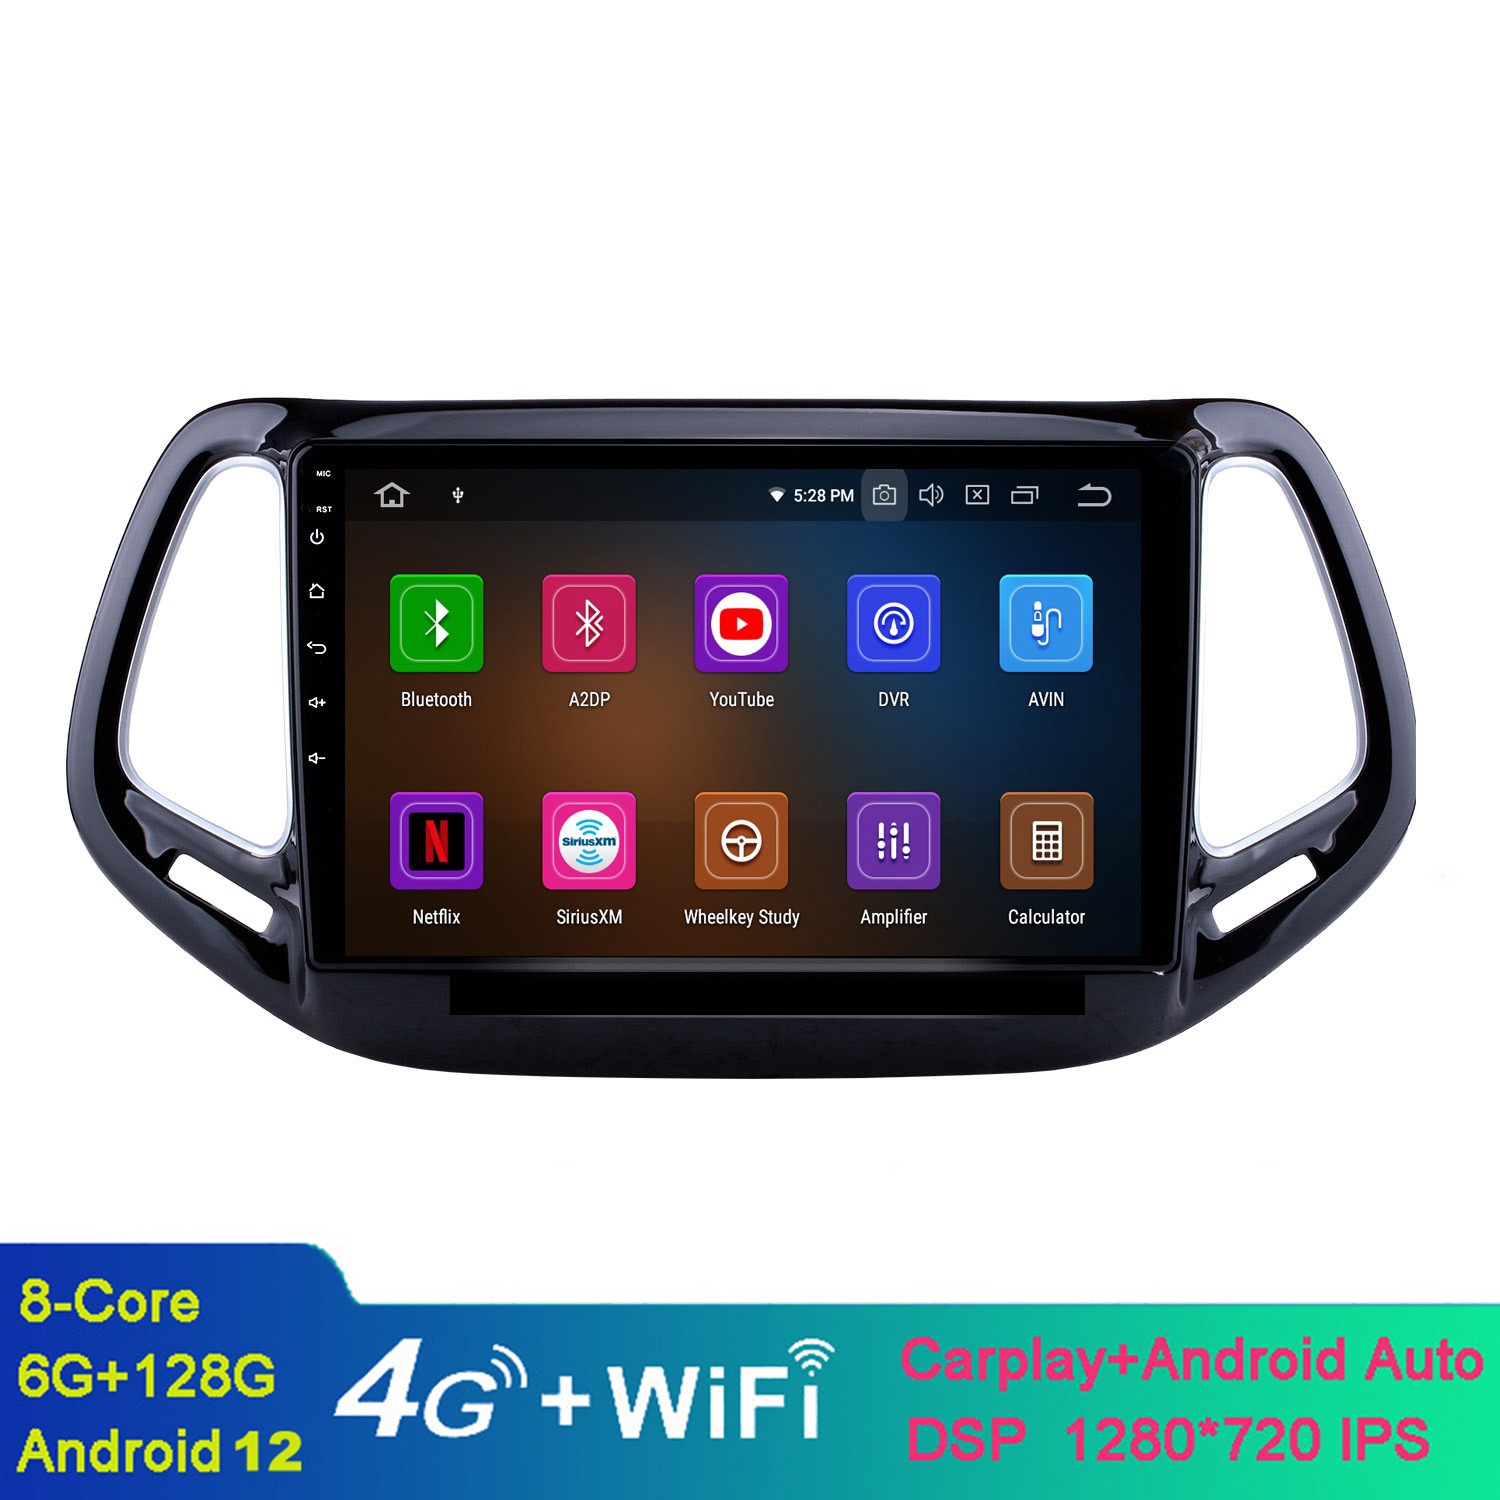 10.1 Inch Android HD Touchscreen Car Video Multimedia Player for 2017-Jeep Compass Support Rear View Camera AUX DVR